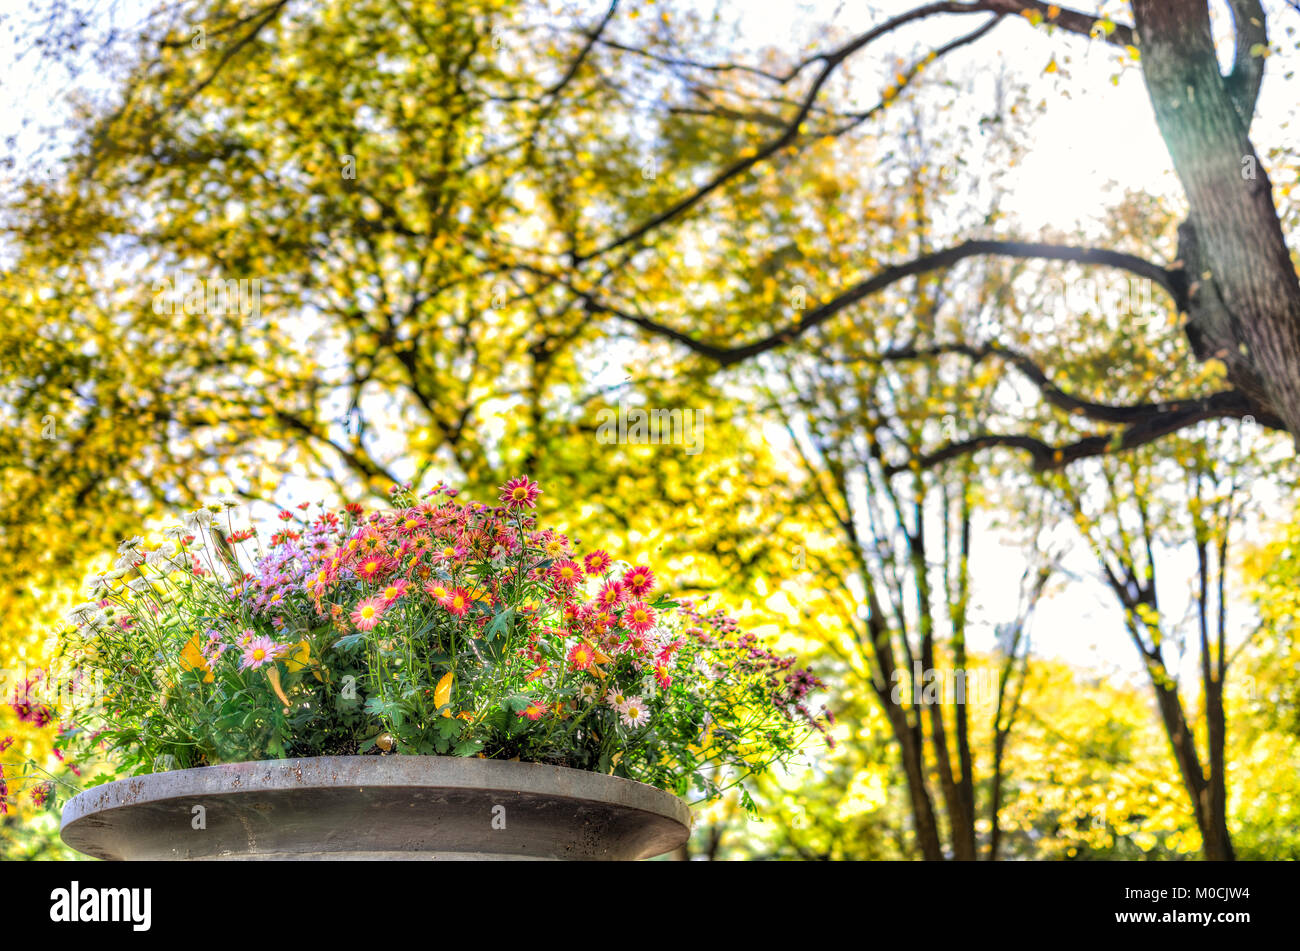 Manhattan NYC Central park New York City with closeup of flowers in pot decoration in autumn fall season with yellow vibrant saturated foliage trees Stock Photo